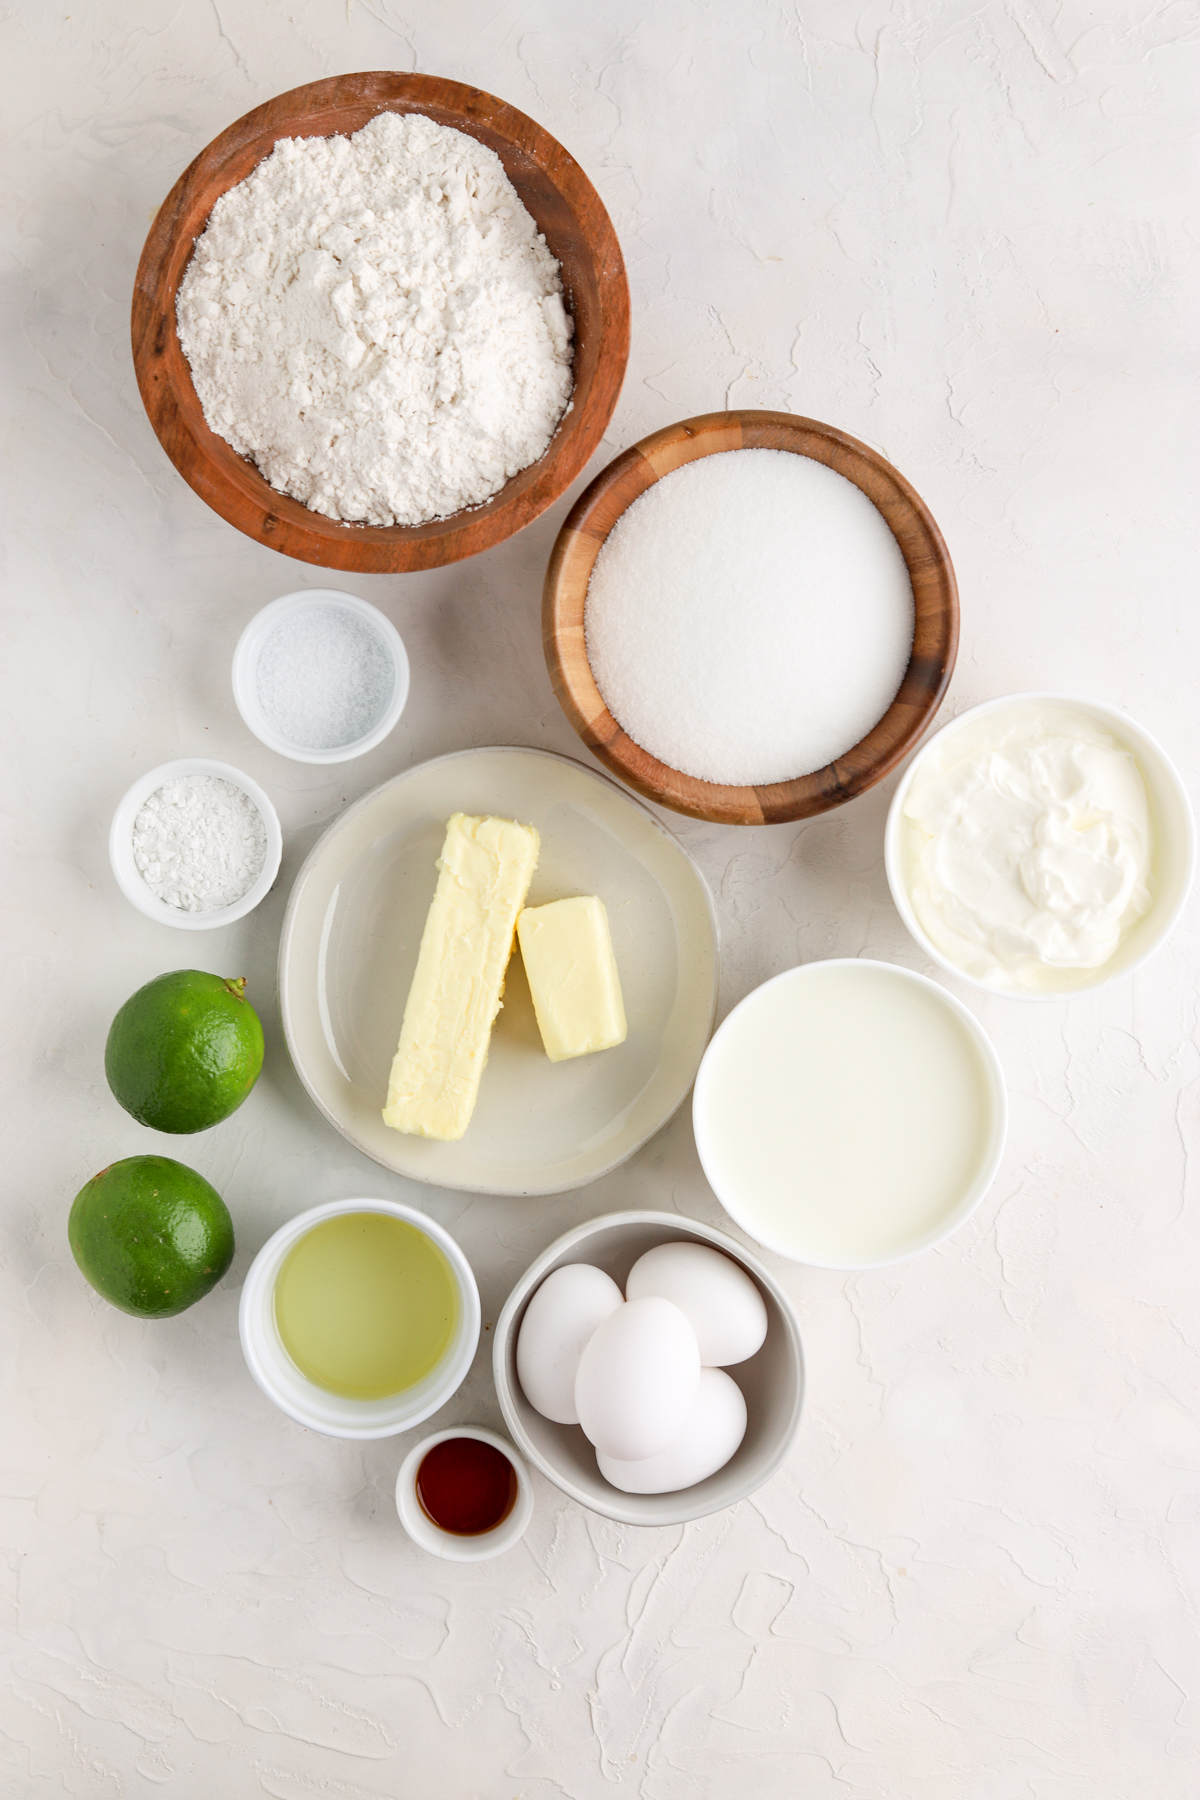 Flour and sugar in bowls, butter on a plate, eggs in a bowl and two limes. 